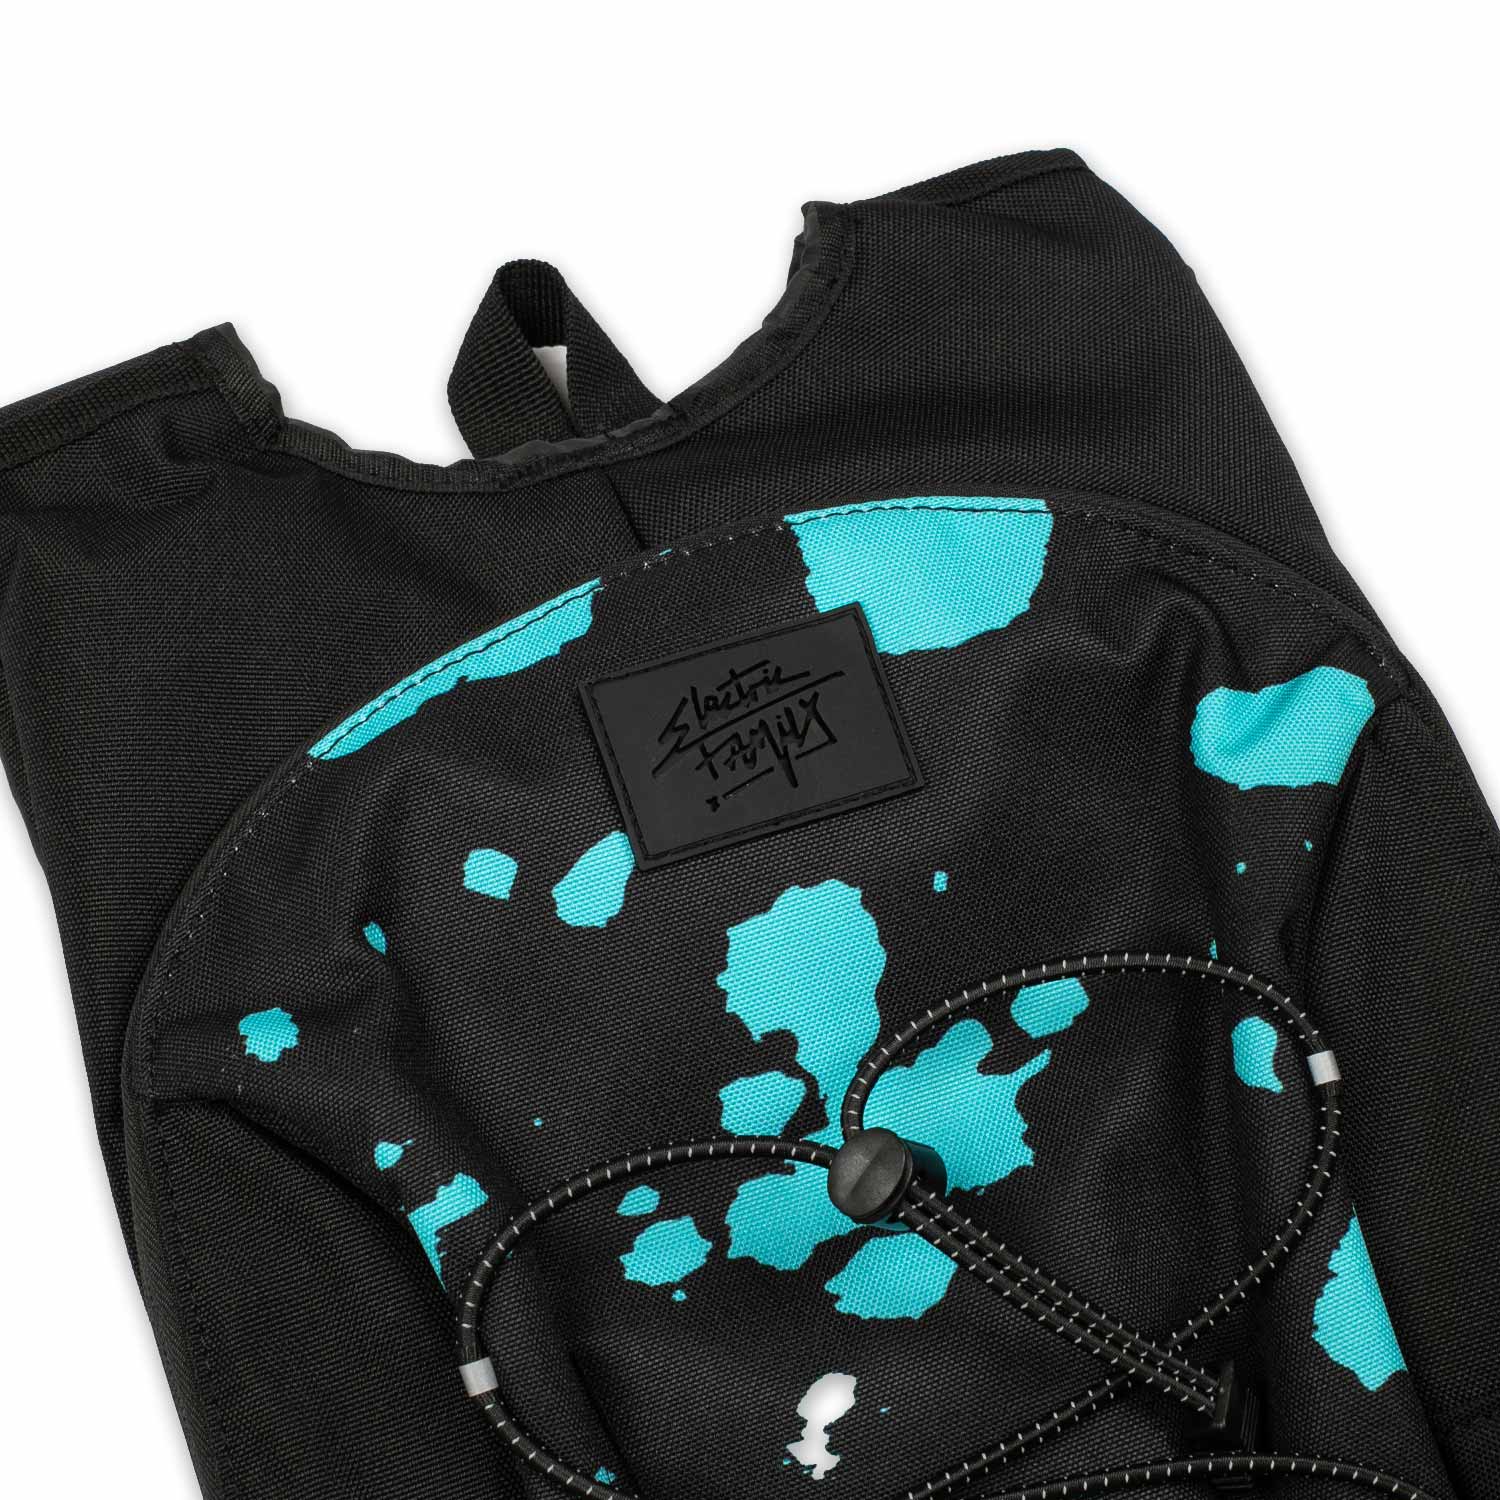 Splatter Dye Hydration Pack - Hydration Pack -  Electric Family-  Electric Family Official Artist Merchandise